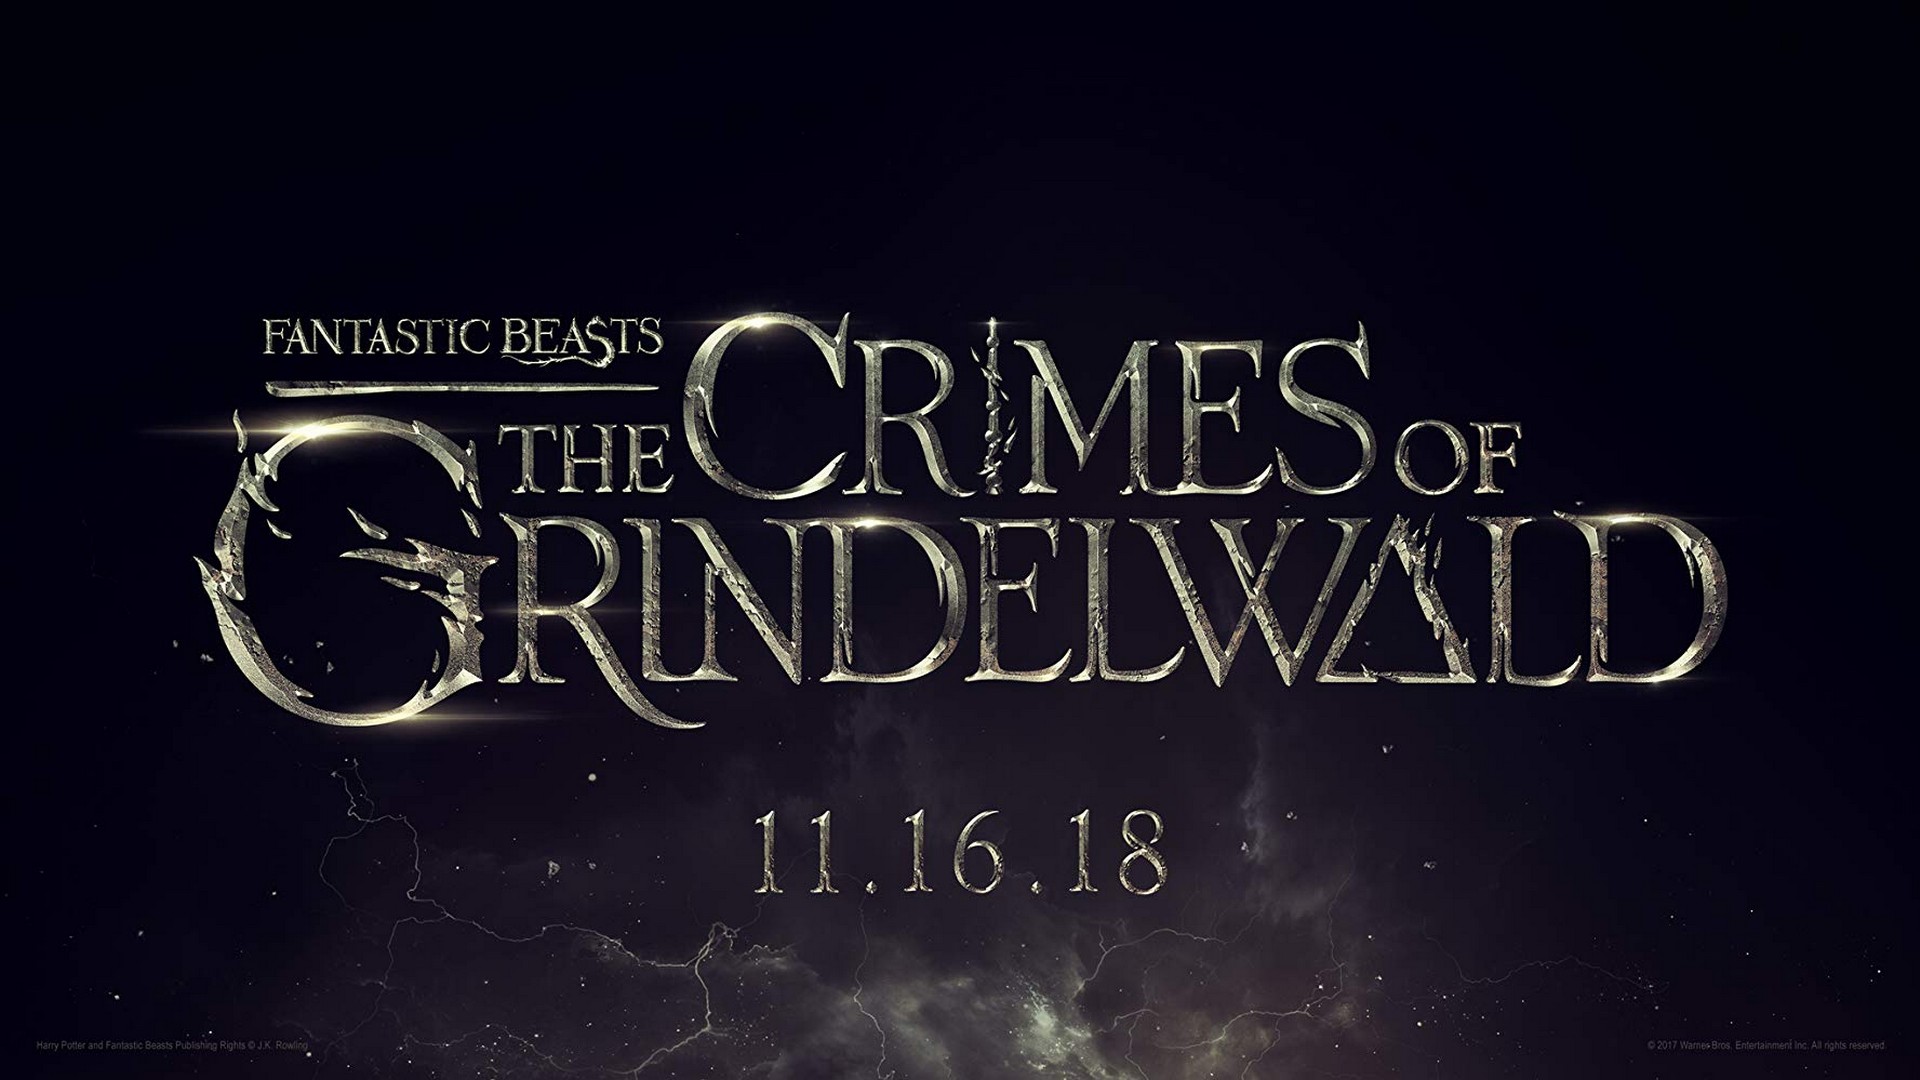 Fantastic Beasts The Crimes of Grindelwald 2018 Poster Wallpaper With Resolution 1920X1080 pixel. You can make this wallpaper for your Mac or Windows Desktop Background, iPhone, Android or Tablet and another Smartphone device for free